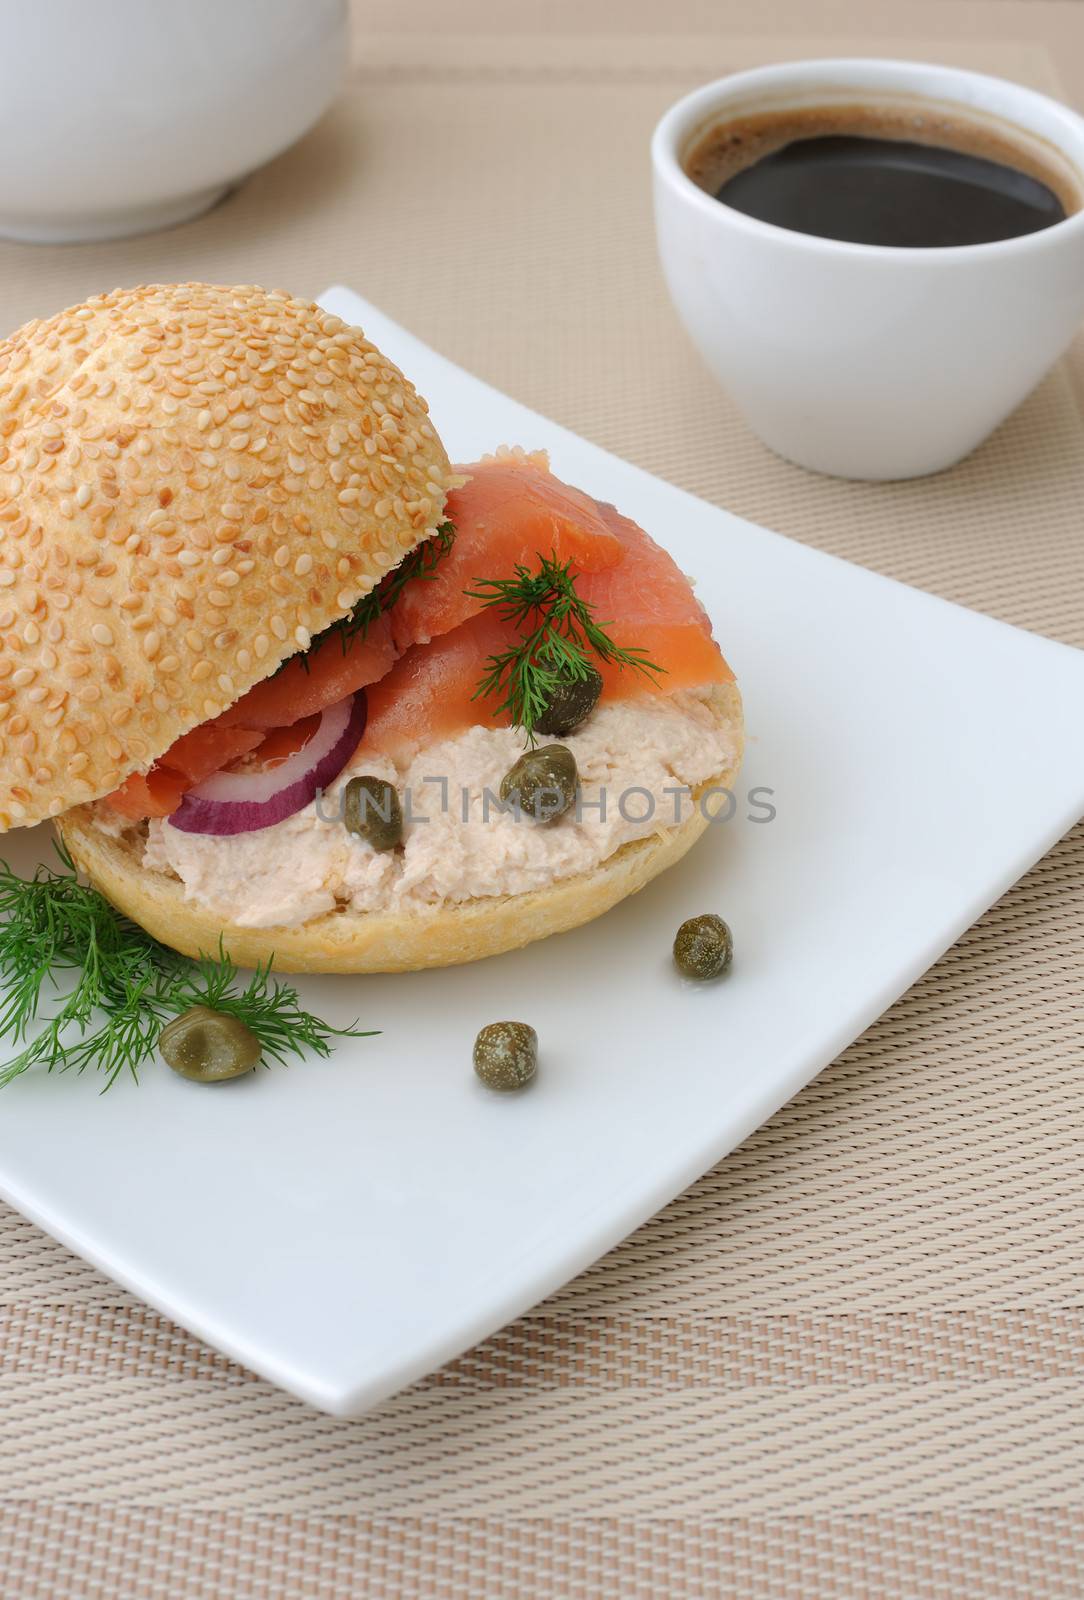 Salmon sandwich and a cup of coffee by Apolonia